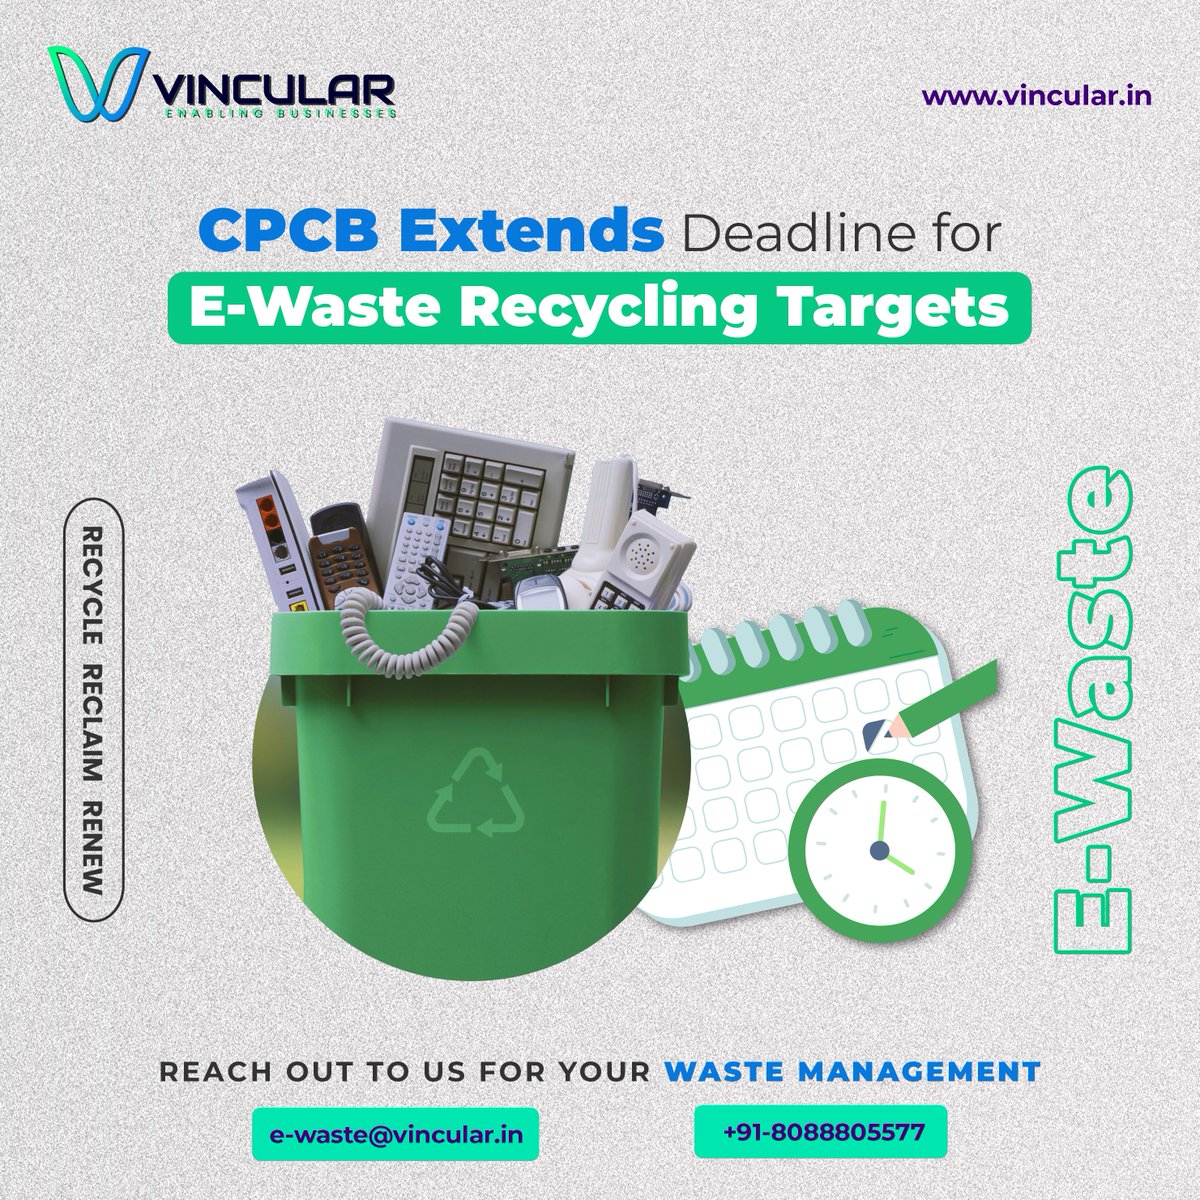 @CPCB_OFFICIAL Extends Deadline for E-Waste Recycling Targets

Notification here: vincular.in/wp-content/upl…

#EWaste #Recycling #CPCB #Deadline #Extension #EPR #Compliance #recycle #WasteManagement #EPRCertificates #ElectronicWaste #certification